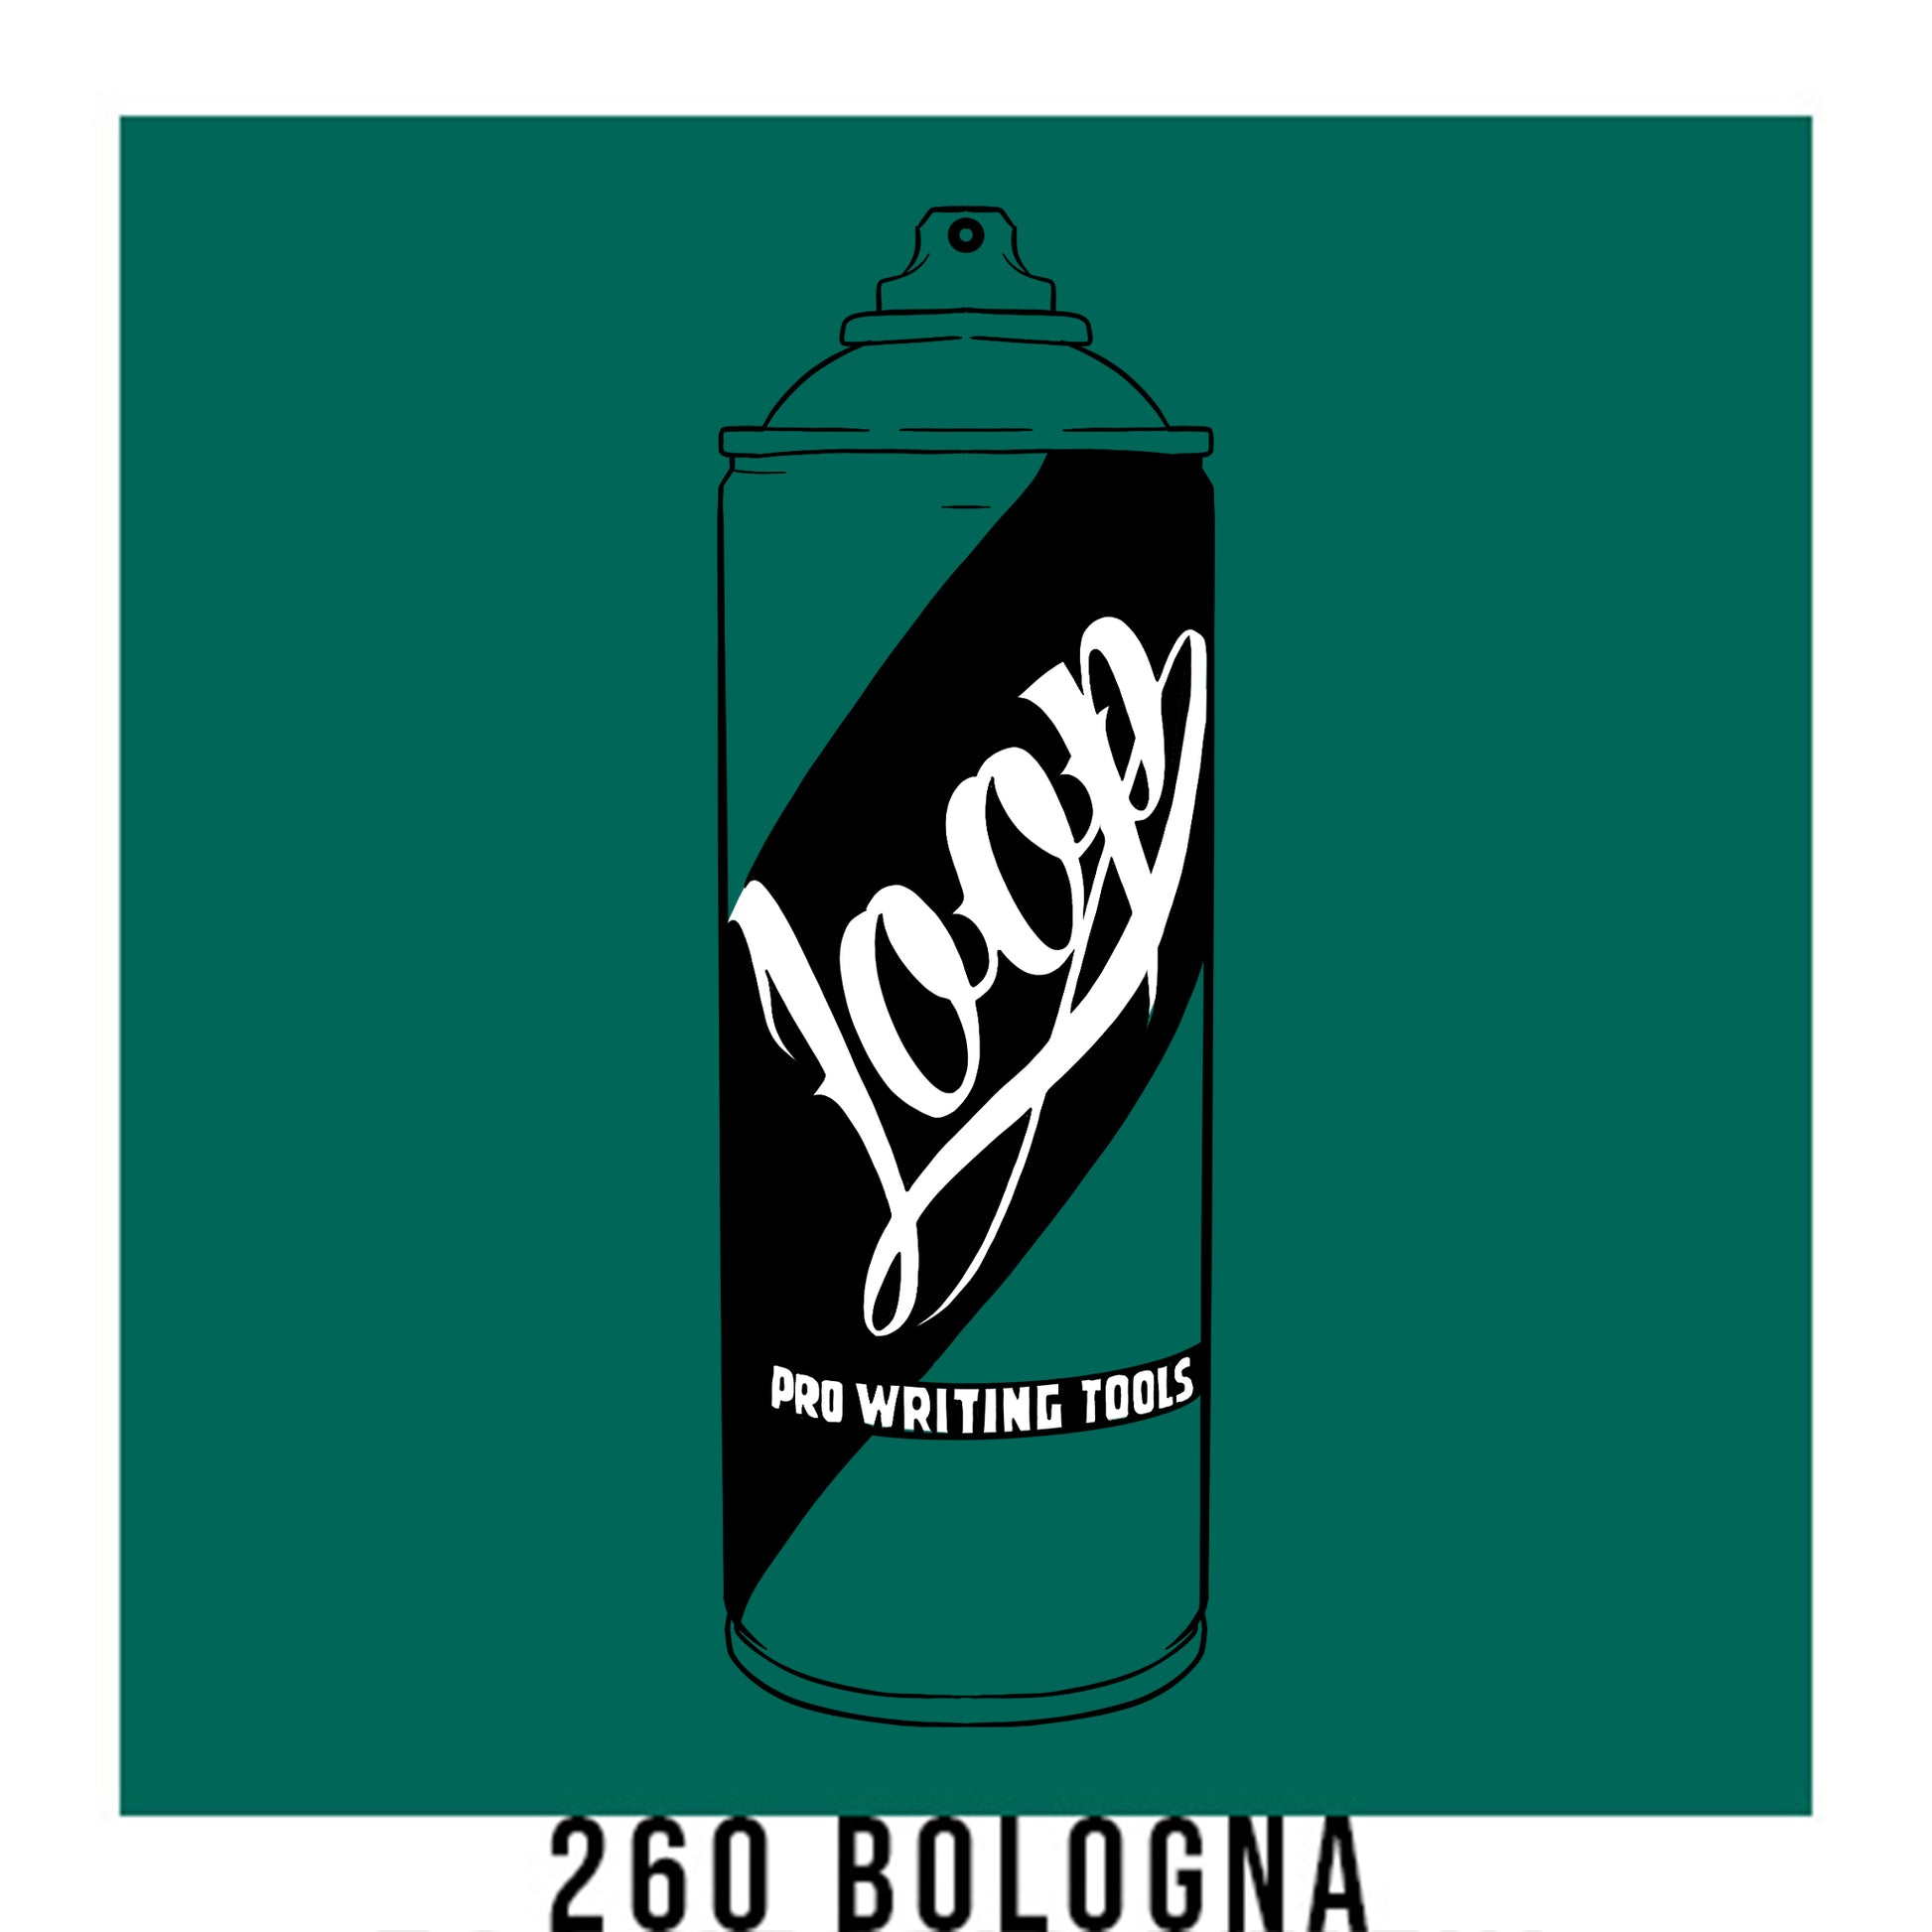 A black outline drawing of a Emerald Green spray paint can with the word "Loop" written on the face in script. The background is a color swatch of the same Emerald Green with a white border with the words "260 Bologna " at the bottom.